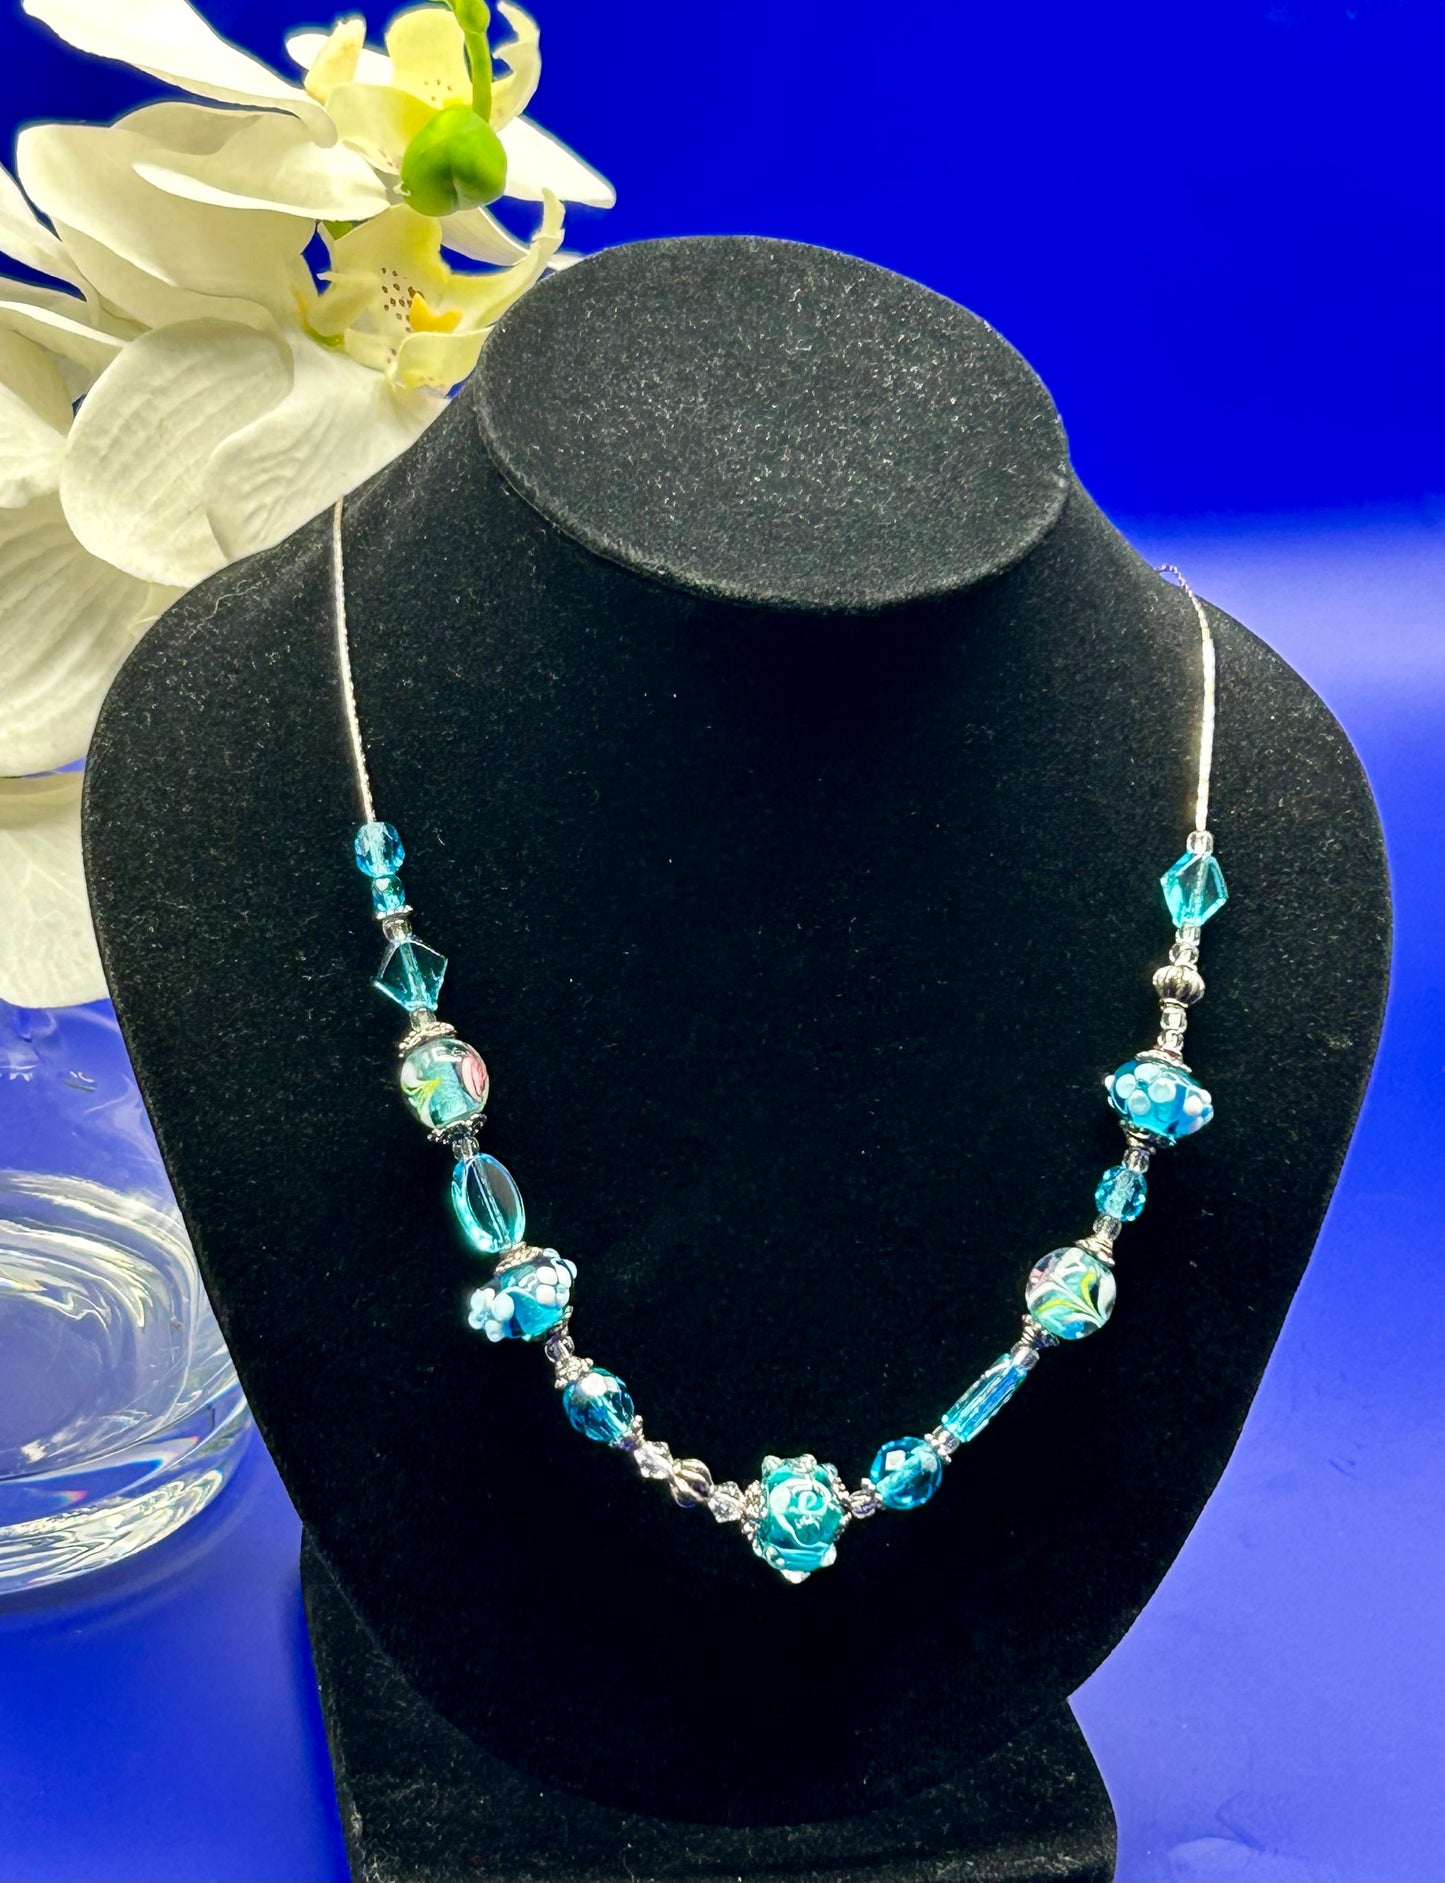 #15 Blue Lampwork Beads on a Sterling Silver Chain